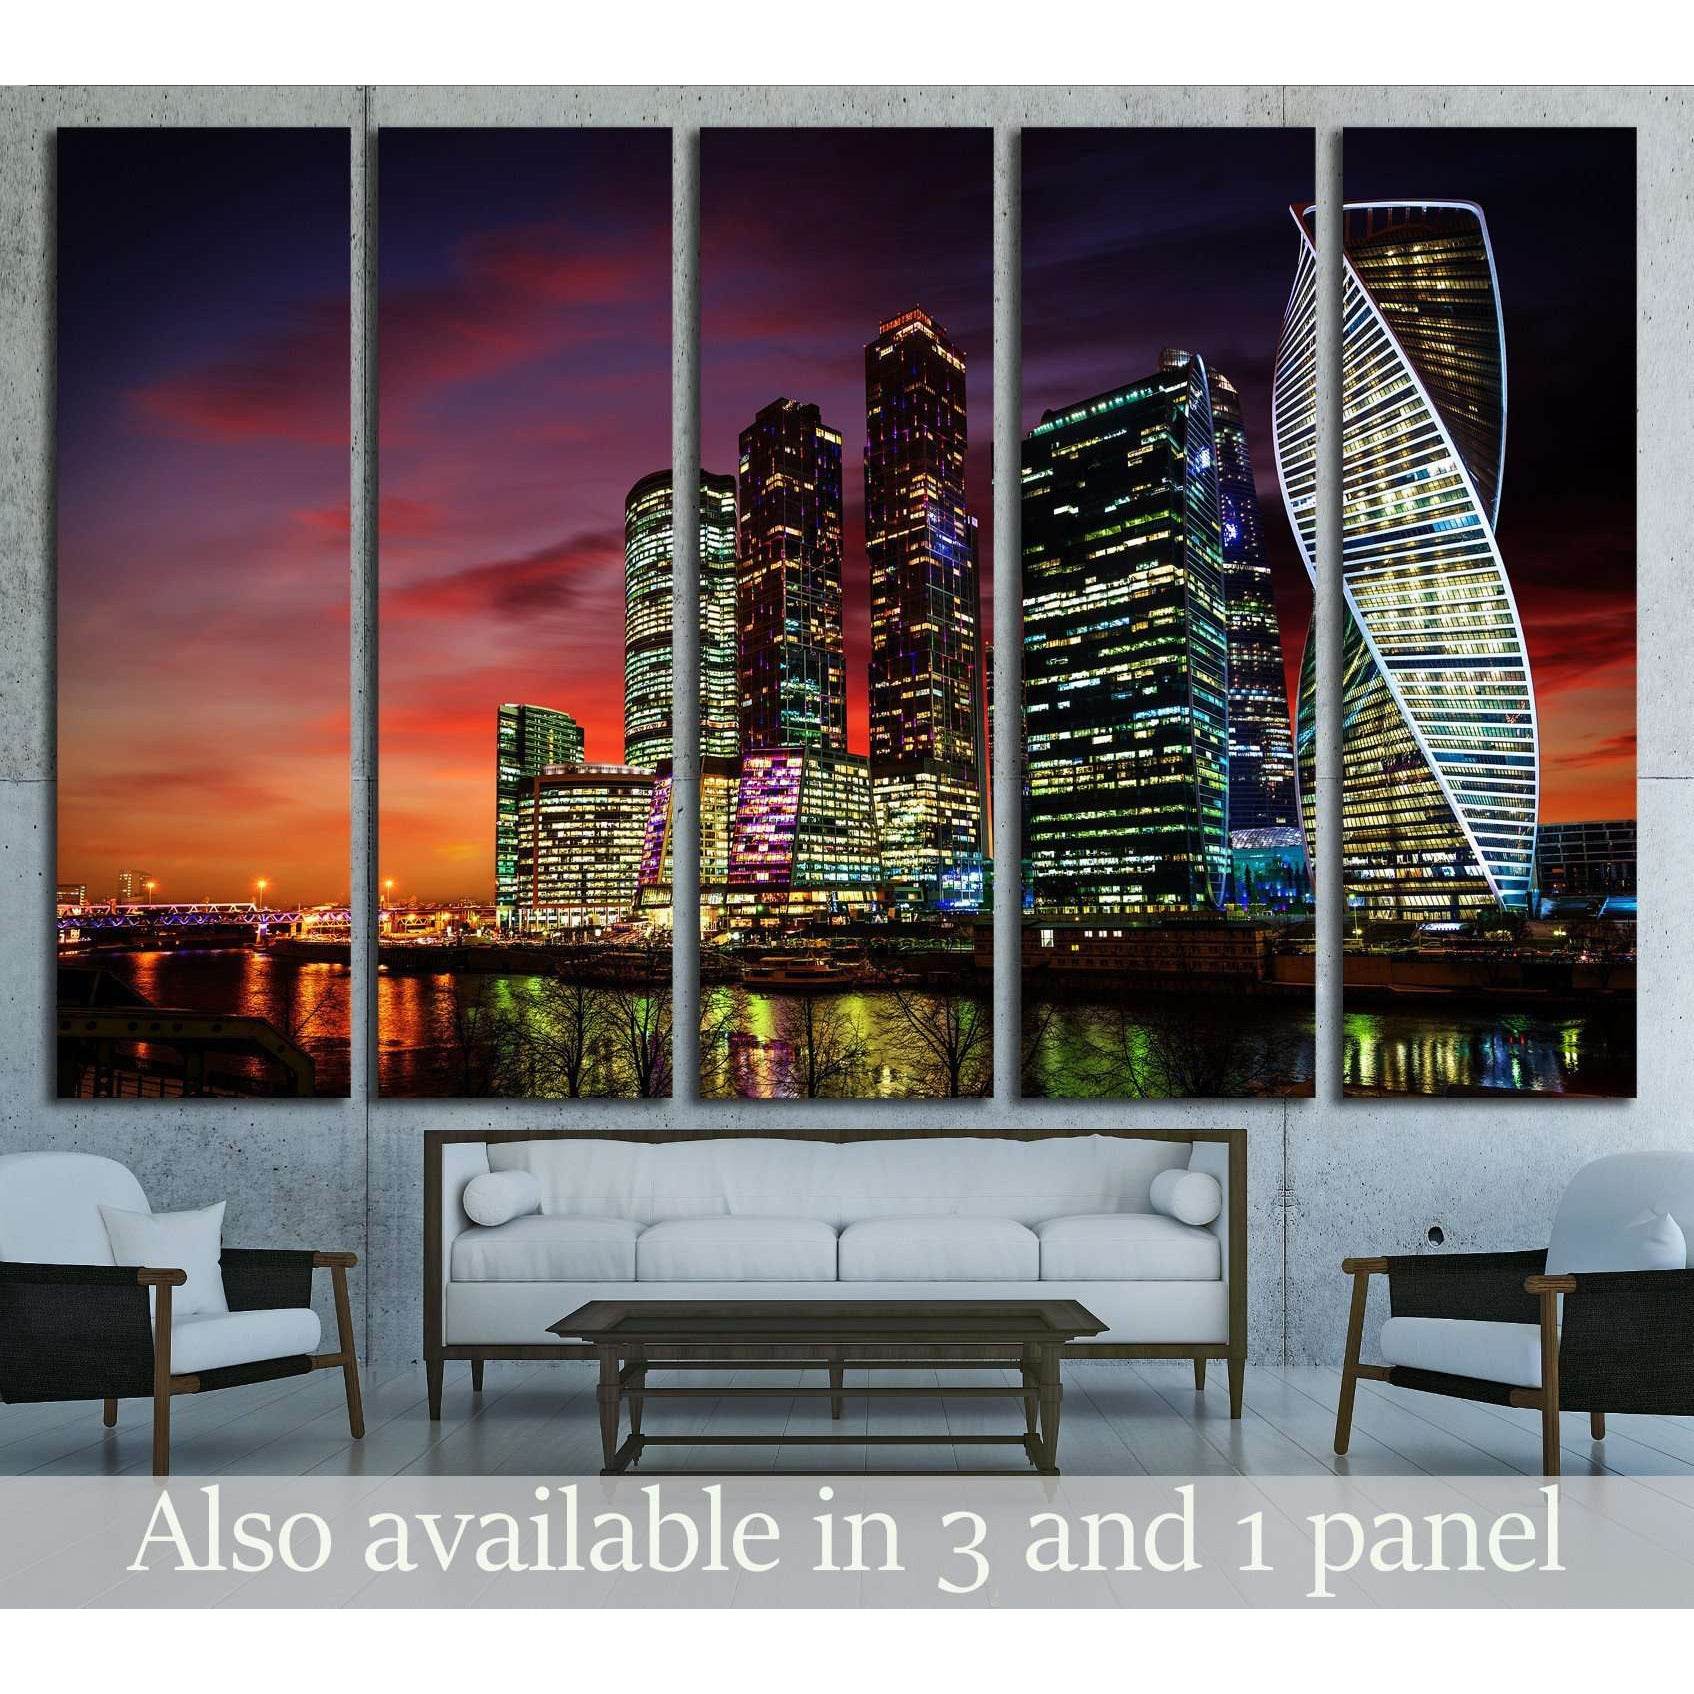 Moscow International Business Center at night, Russia №1541 Ready to Hang Canvas Print